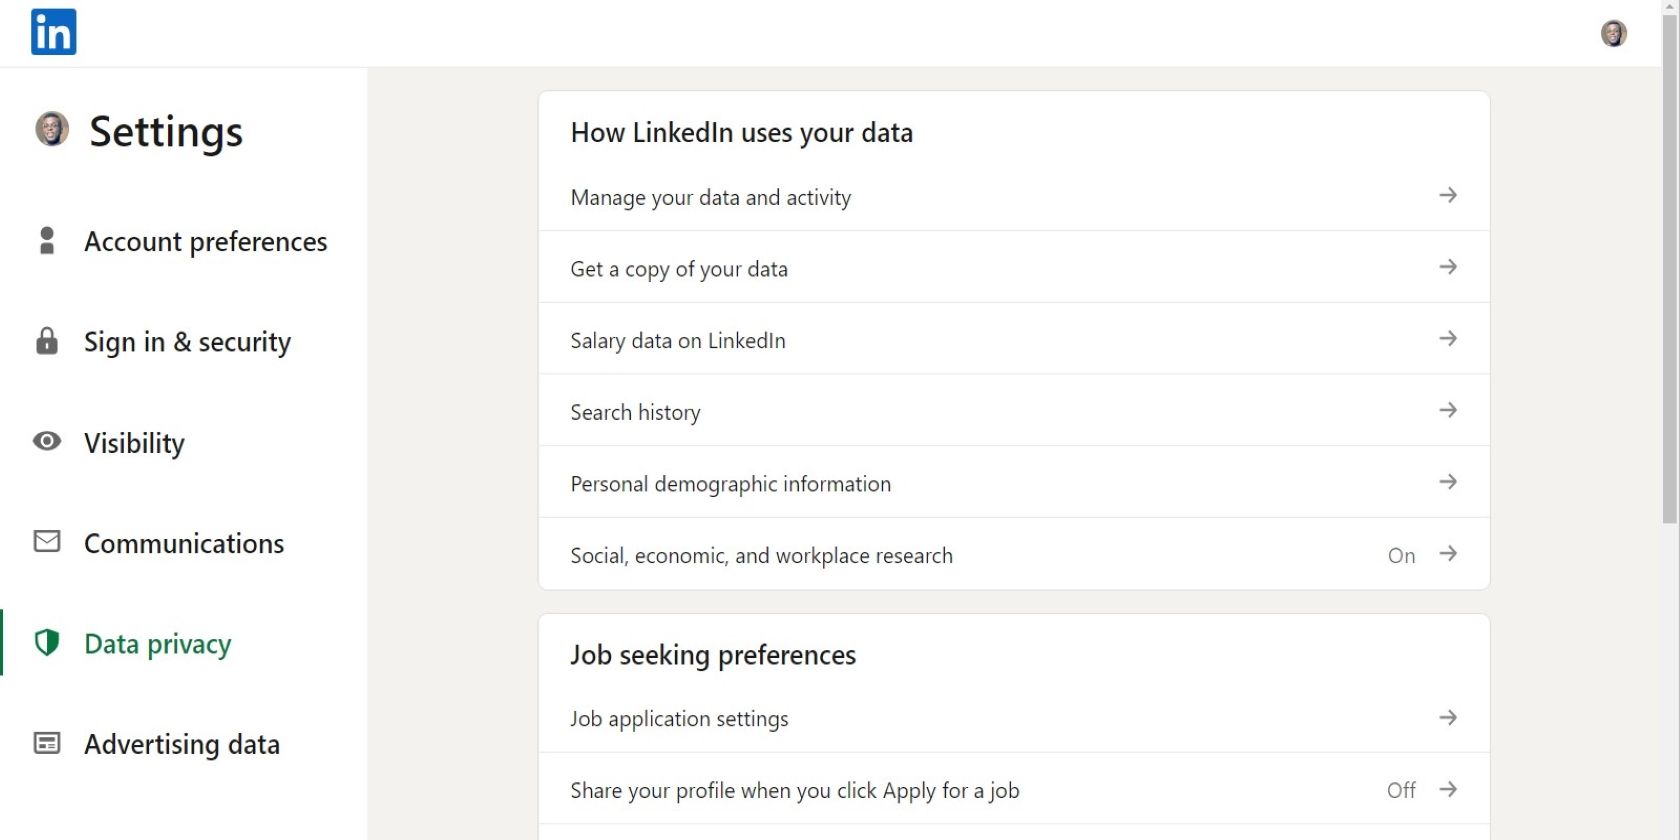 Accessing the Data Privacy Menu on LinkedIn